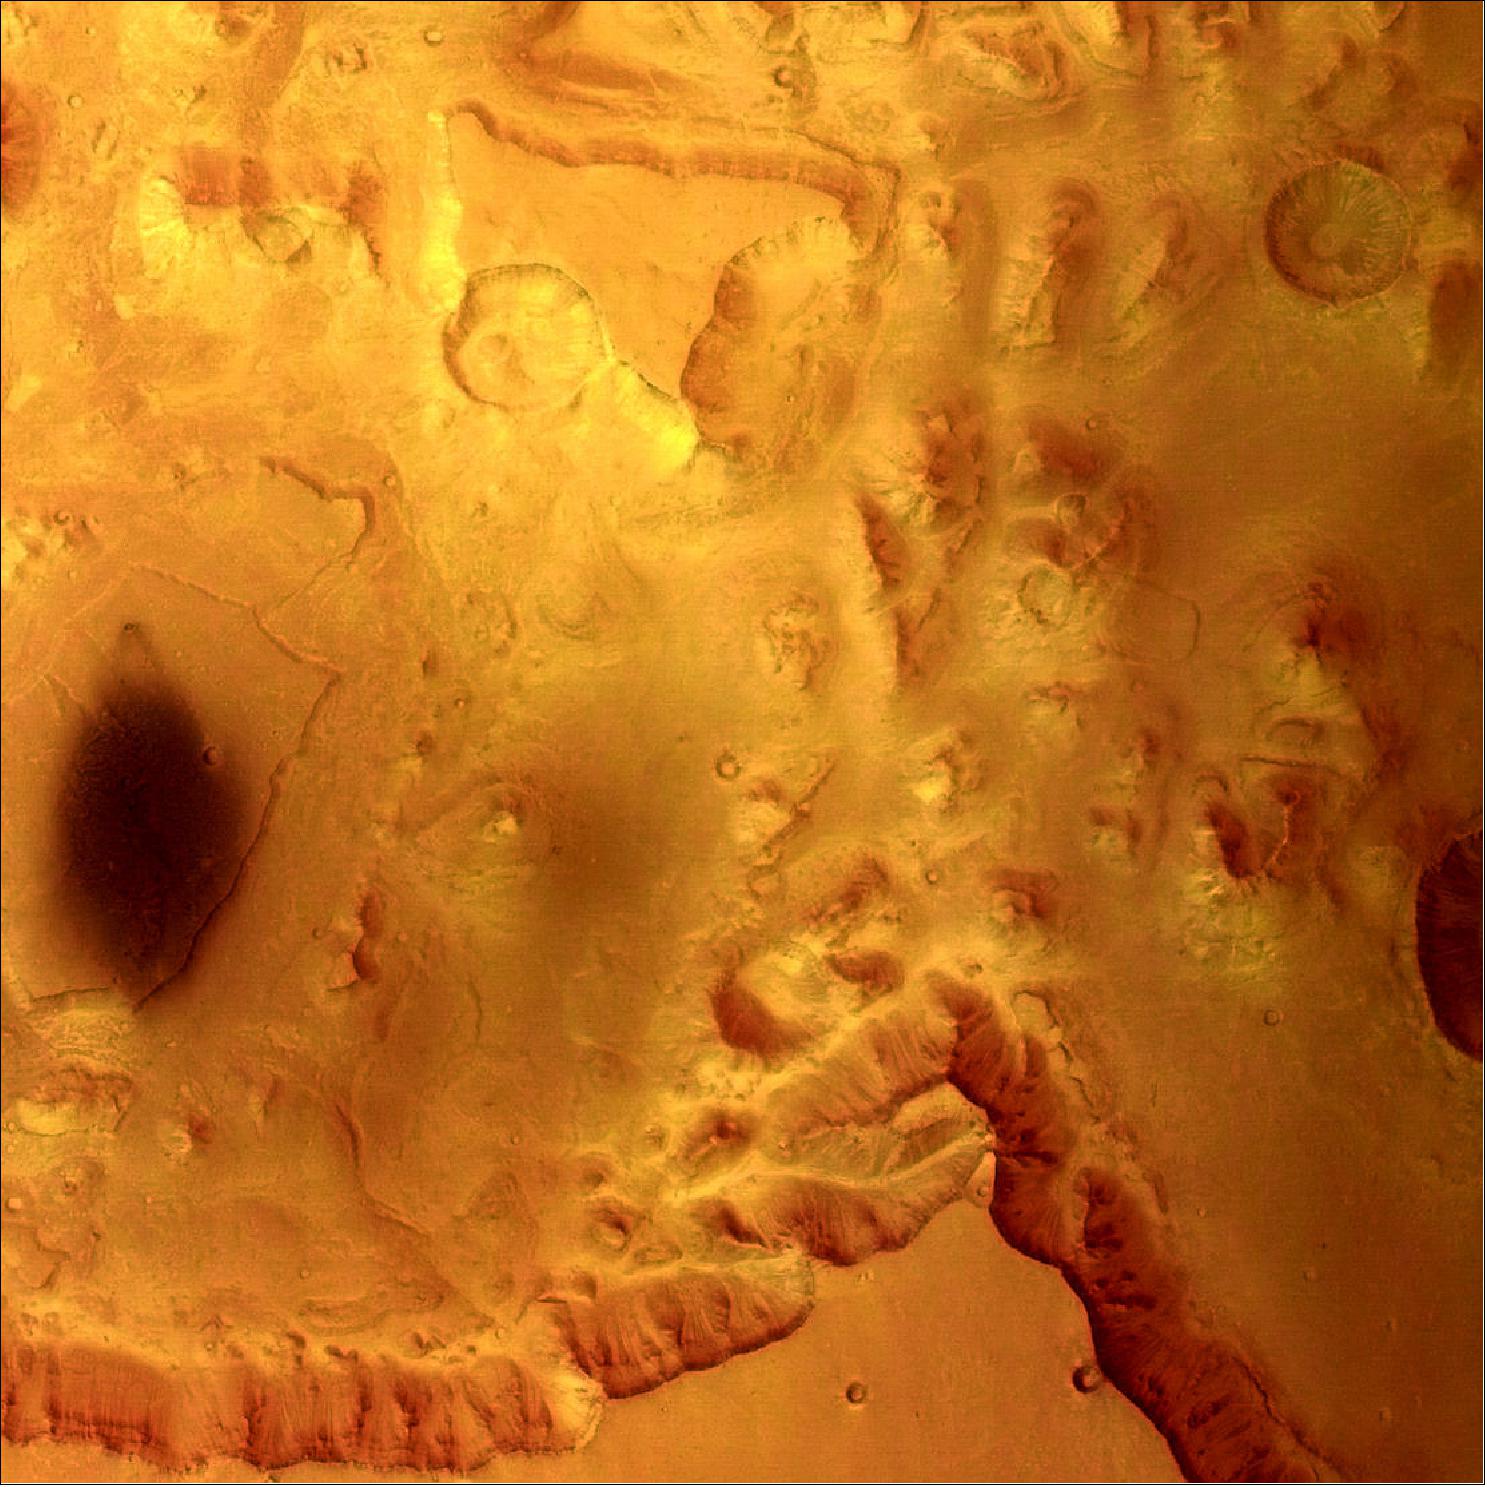 Figure 94: This picture was taken by the HRSC aboard ESA's Mars Express, in color and 3D, during orbit 18 on 14 January 2004 from a height of 275 km. The location is in Valles Marineris at 5º North and 323º East. The area is 50 km across, at a resolution of 12 m/pixel, and shows mesas and cliffs as well as flow features which indicate erosion by the action of flowing water. The landscape is seen in a vertical view, with north at the bottom (image credit: ESA/DLR/FU Berlin (G. Neukum), CC BY-SA 3.0 IGO) 46)